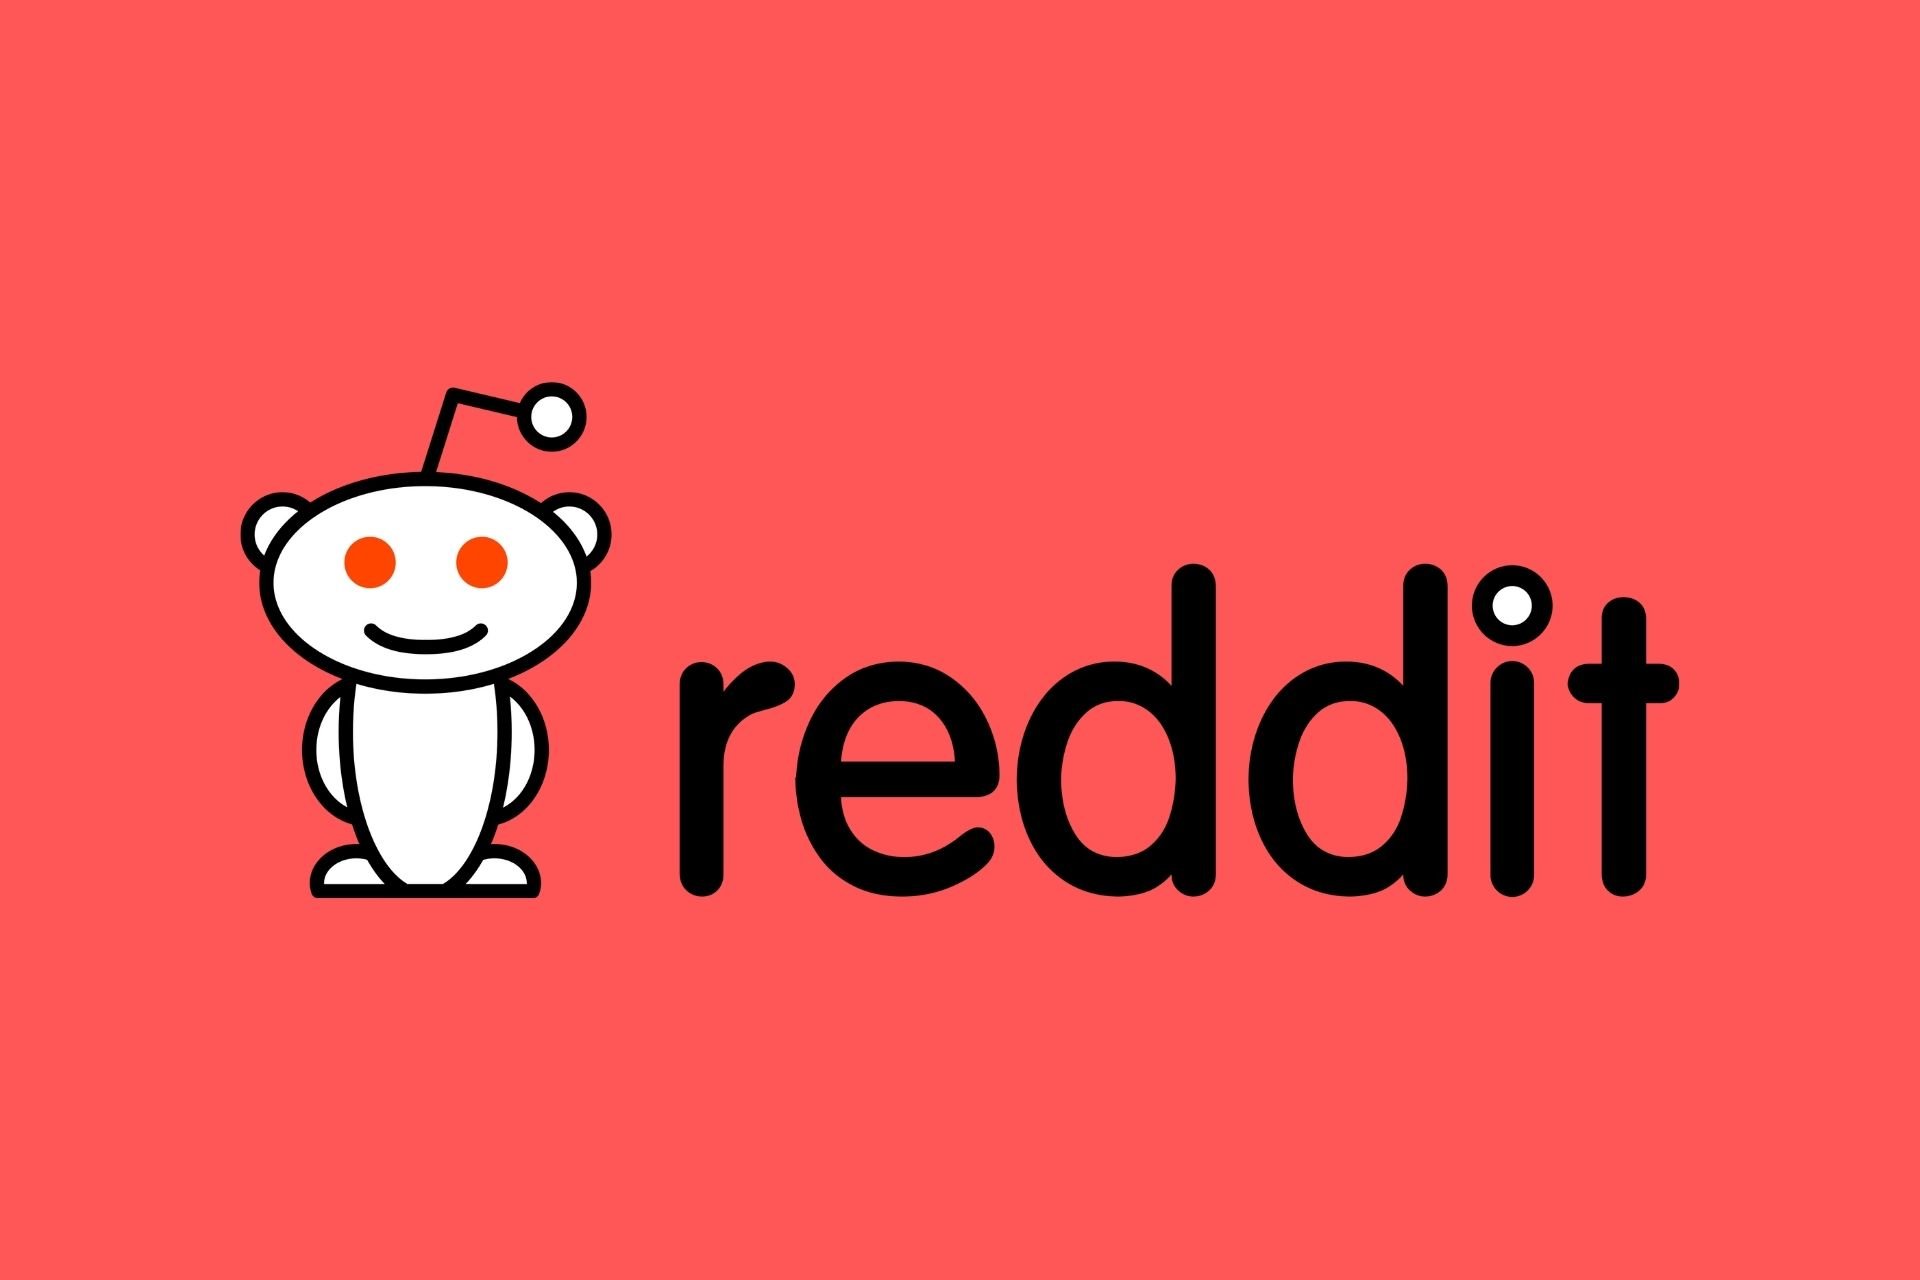 What are the best Reddit apps for Windows 10